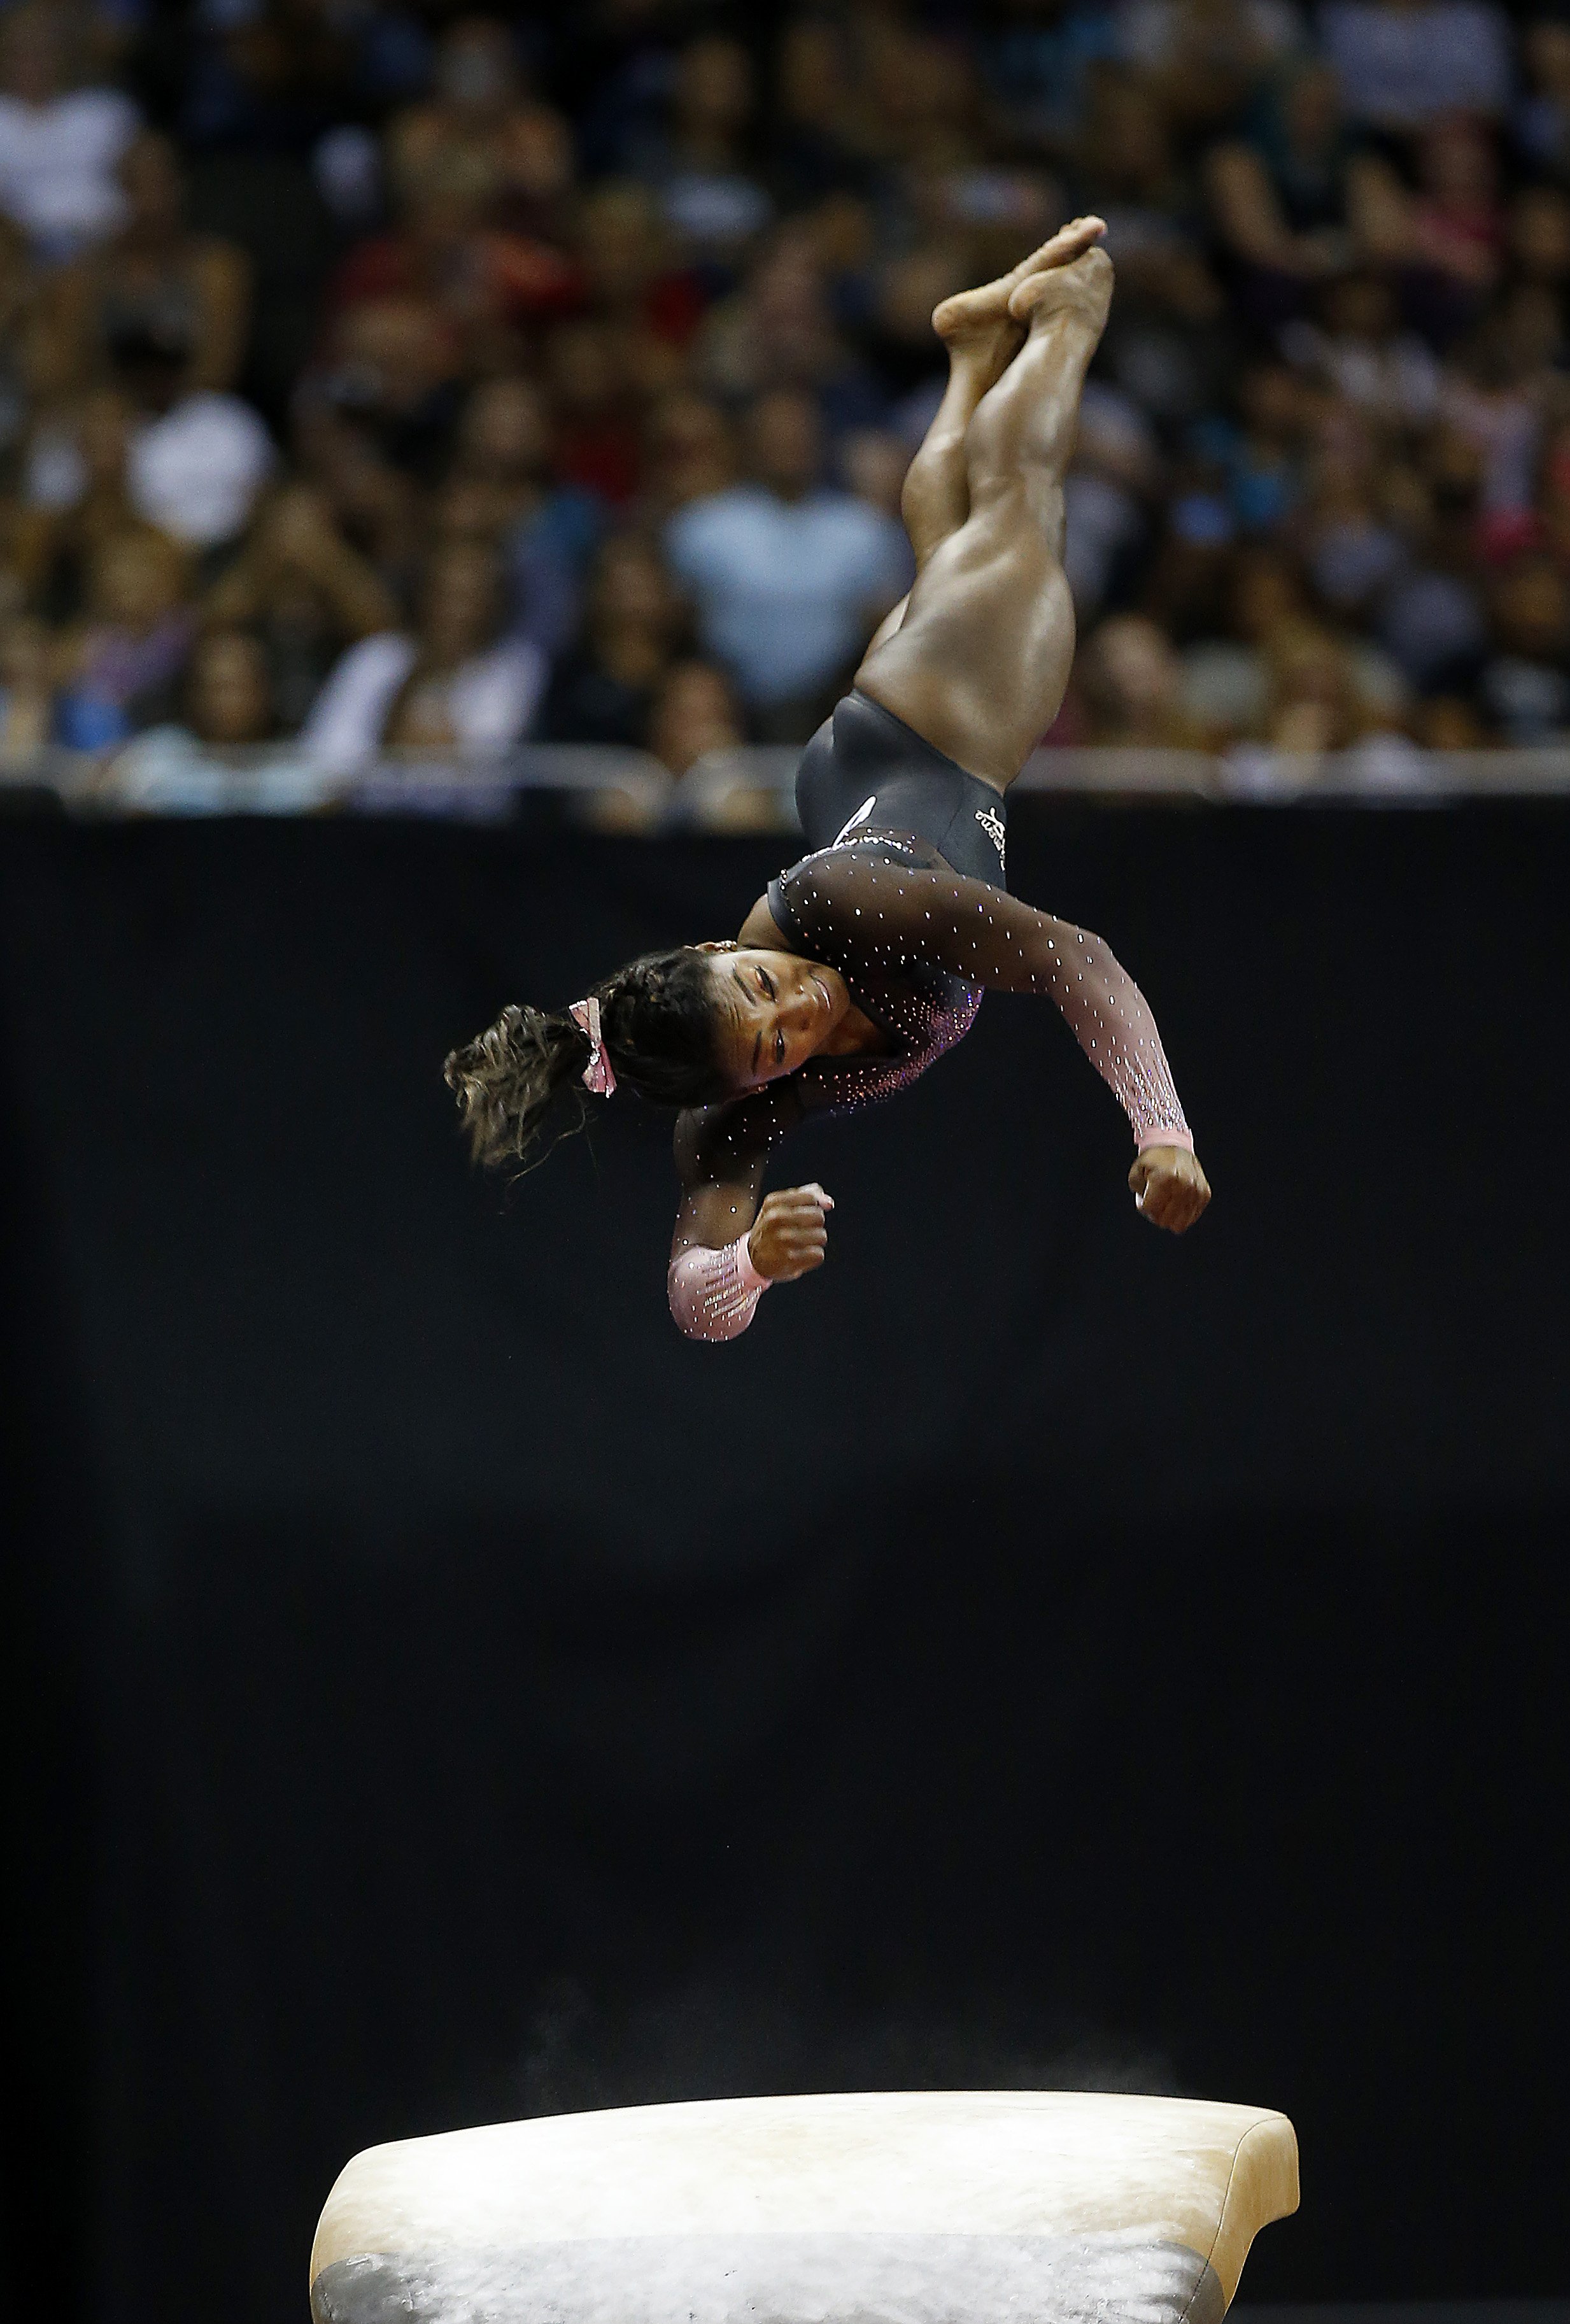 Simone Biles competes on the vault during the Women's Senior competition of the 2019 U.S. Gymnastics Championships at the Sprint Center on August 11, 2019 in Kansas City, Missouri | Photo: Getty Images